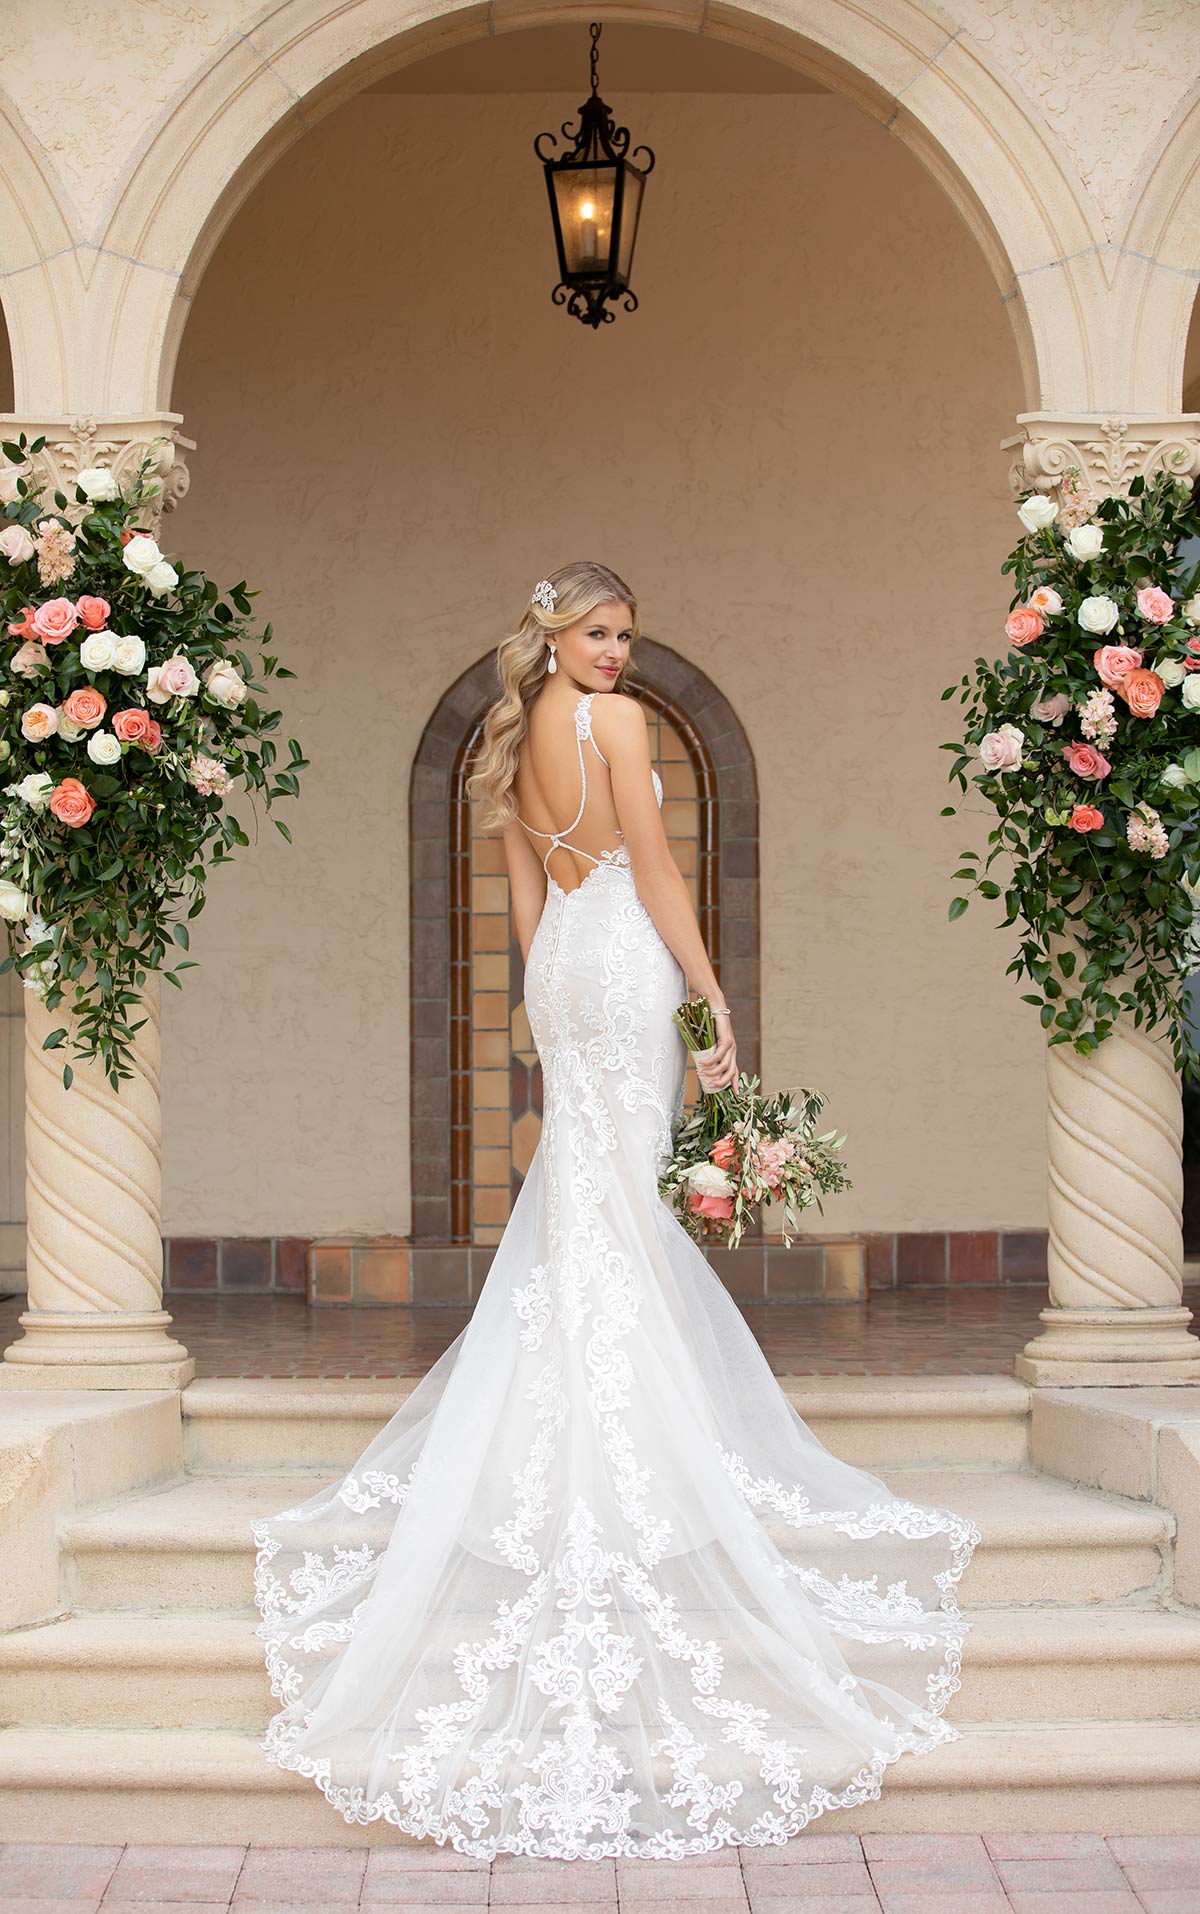 Affordable Wedding Dress Label Stella York Celebrates Love With New Collection Newswire